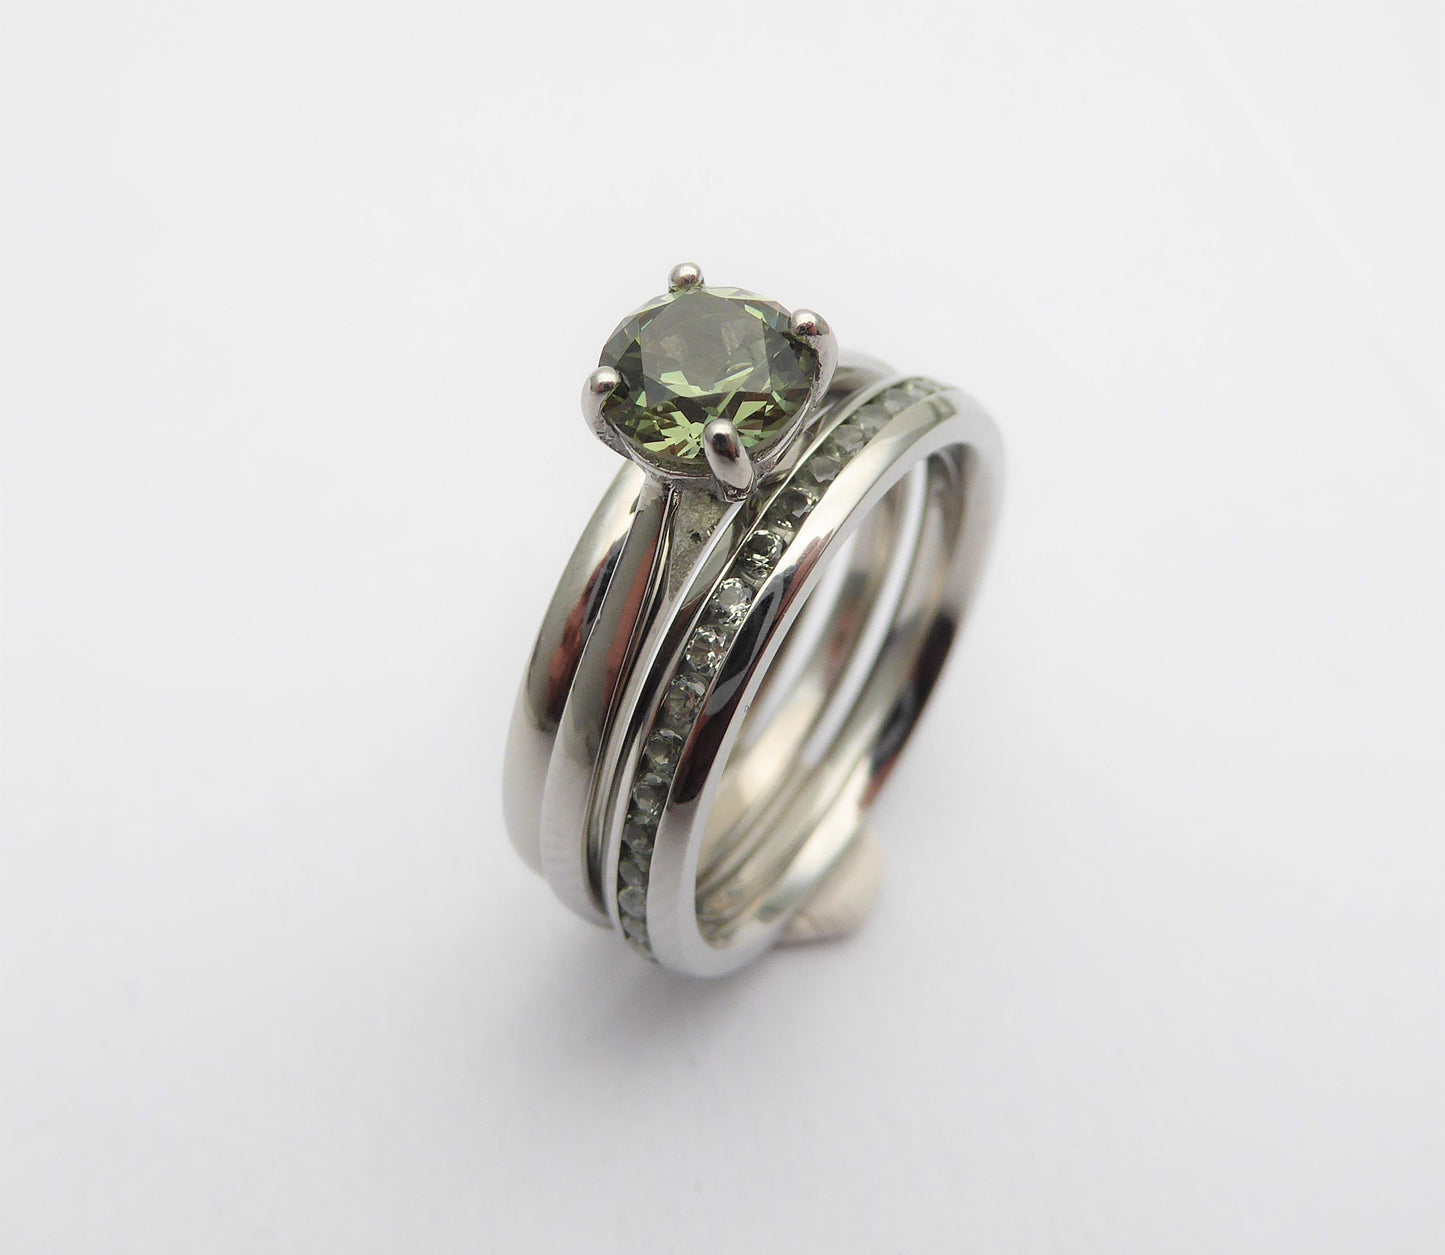 Wedding set! Green Sapphire 1ct cathedral solitaire and matching eternity & Wedding ring in Titanium or White Gold